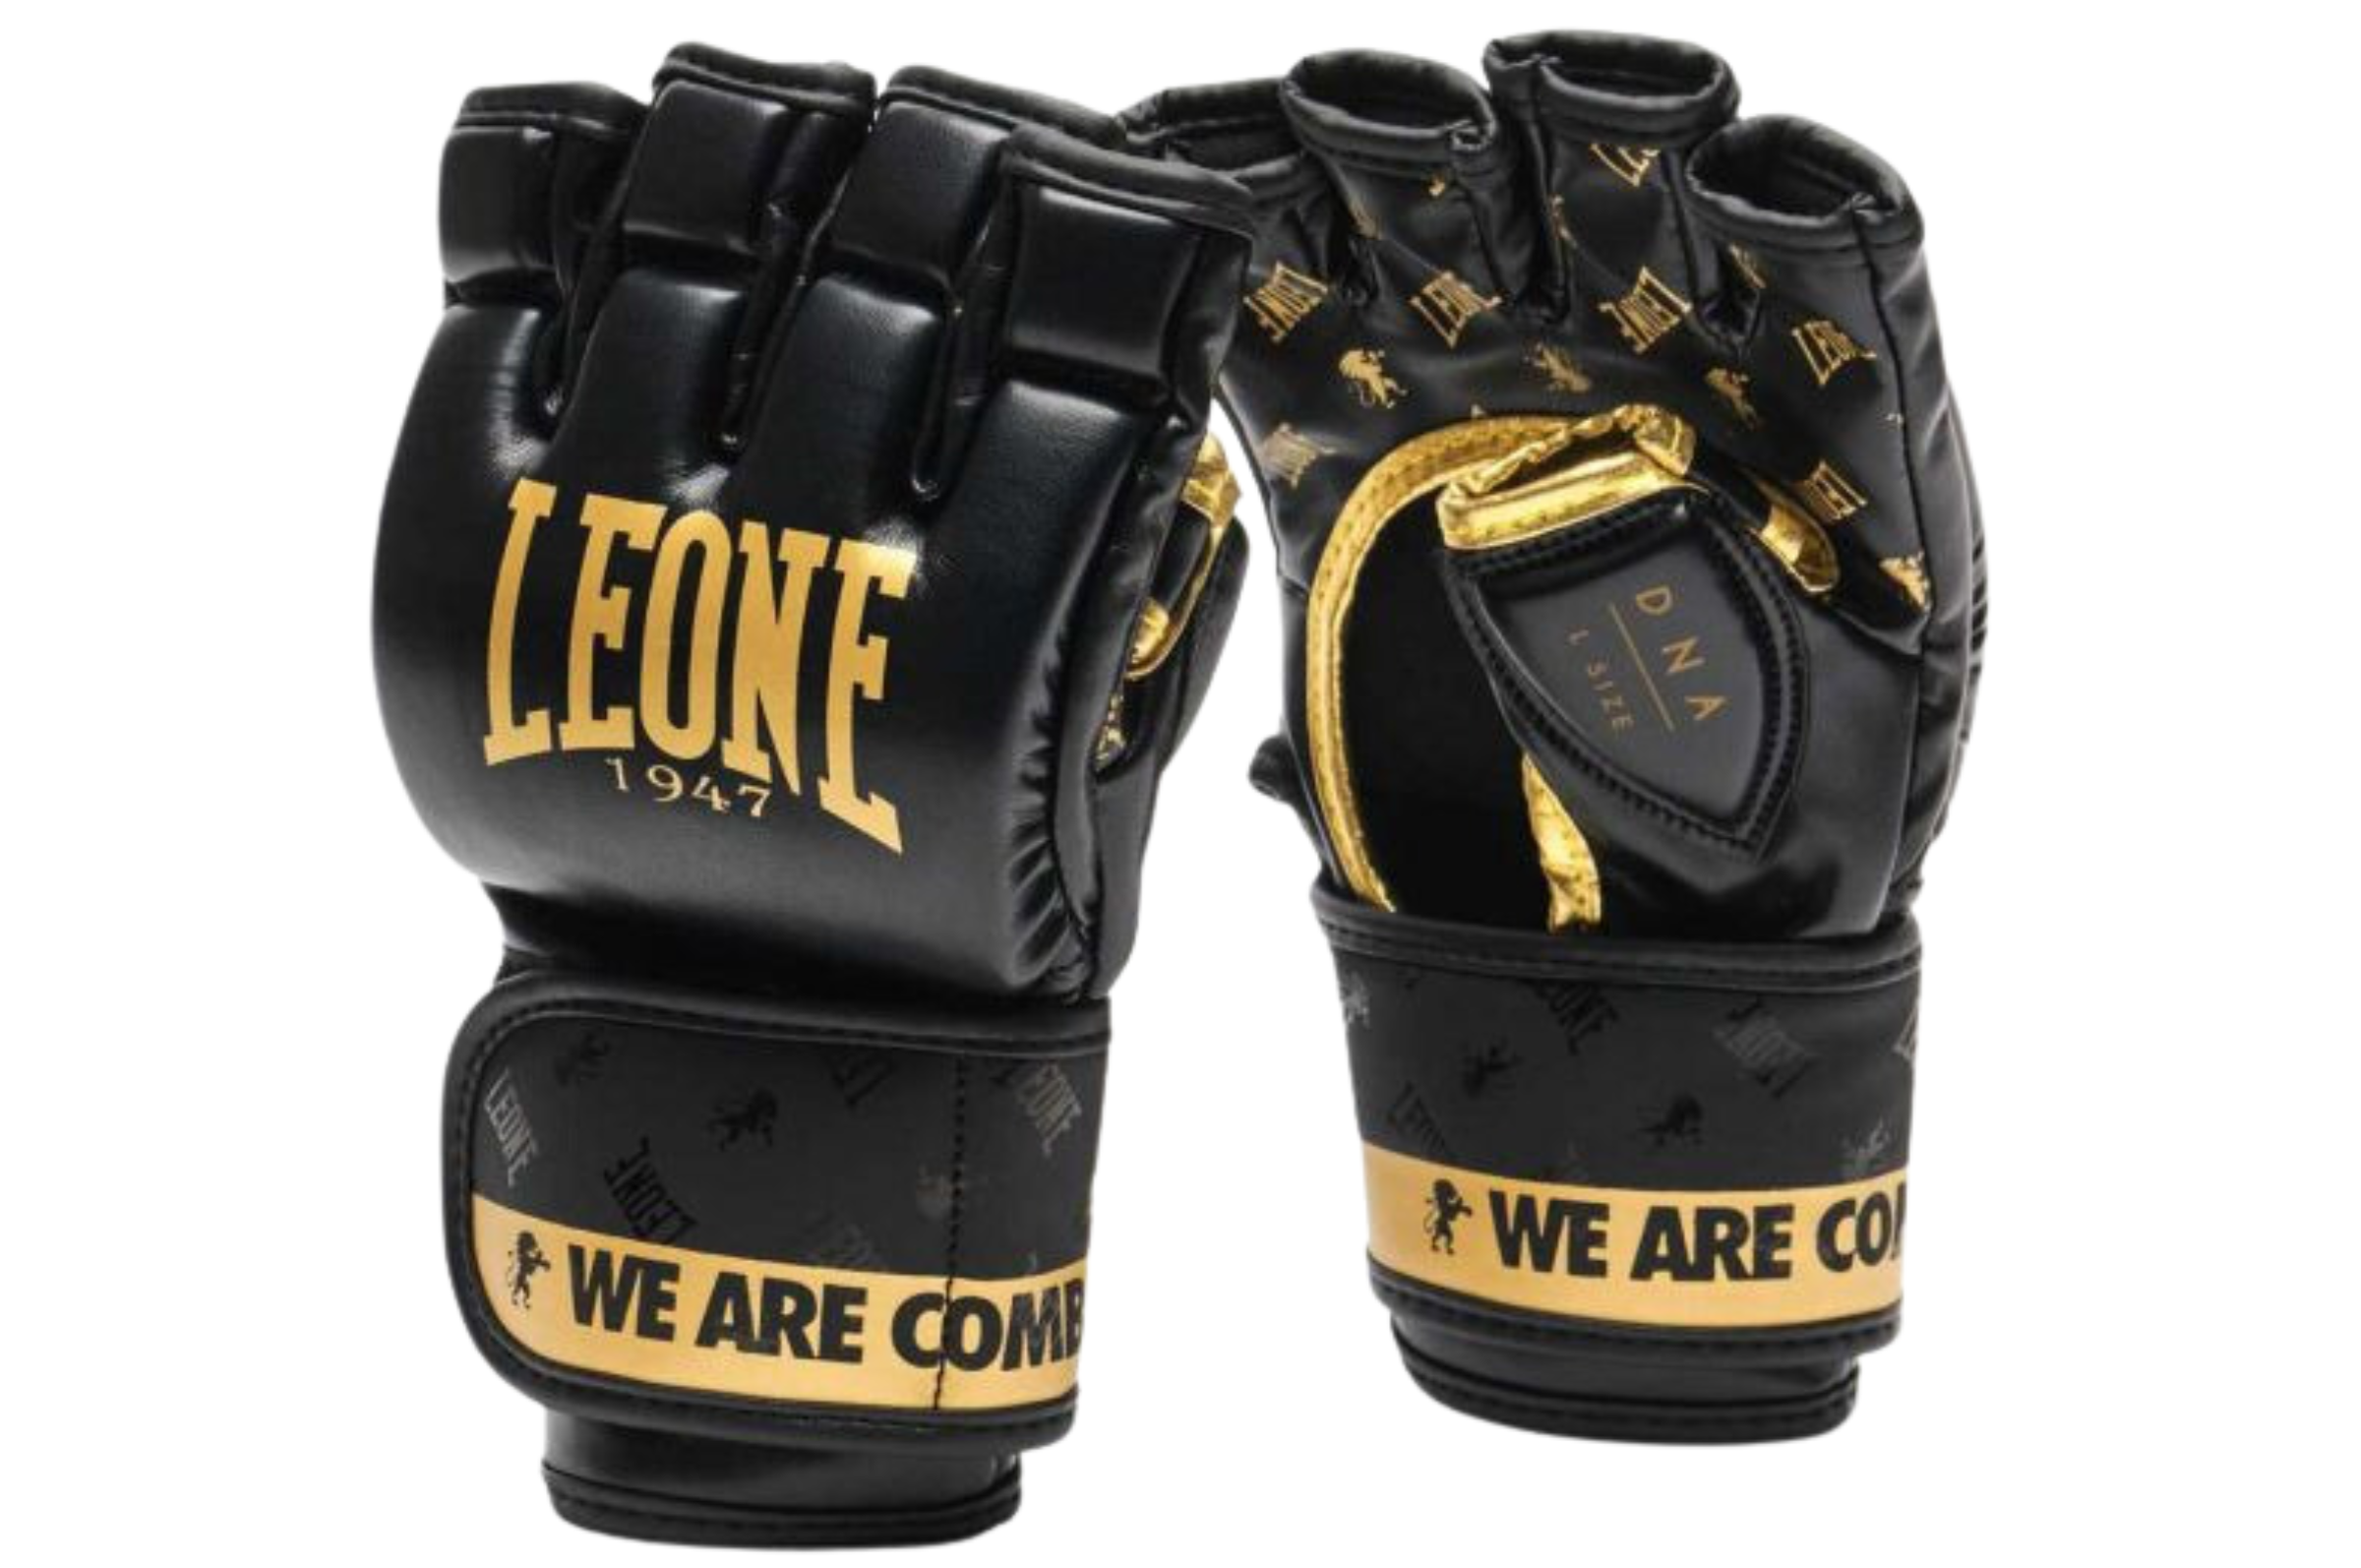 Leone1947 DNA Artificial Leather Boxing Gloves Black